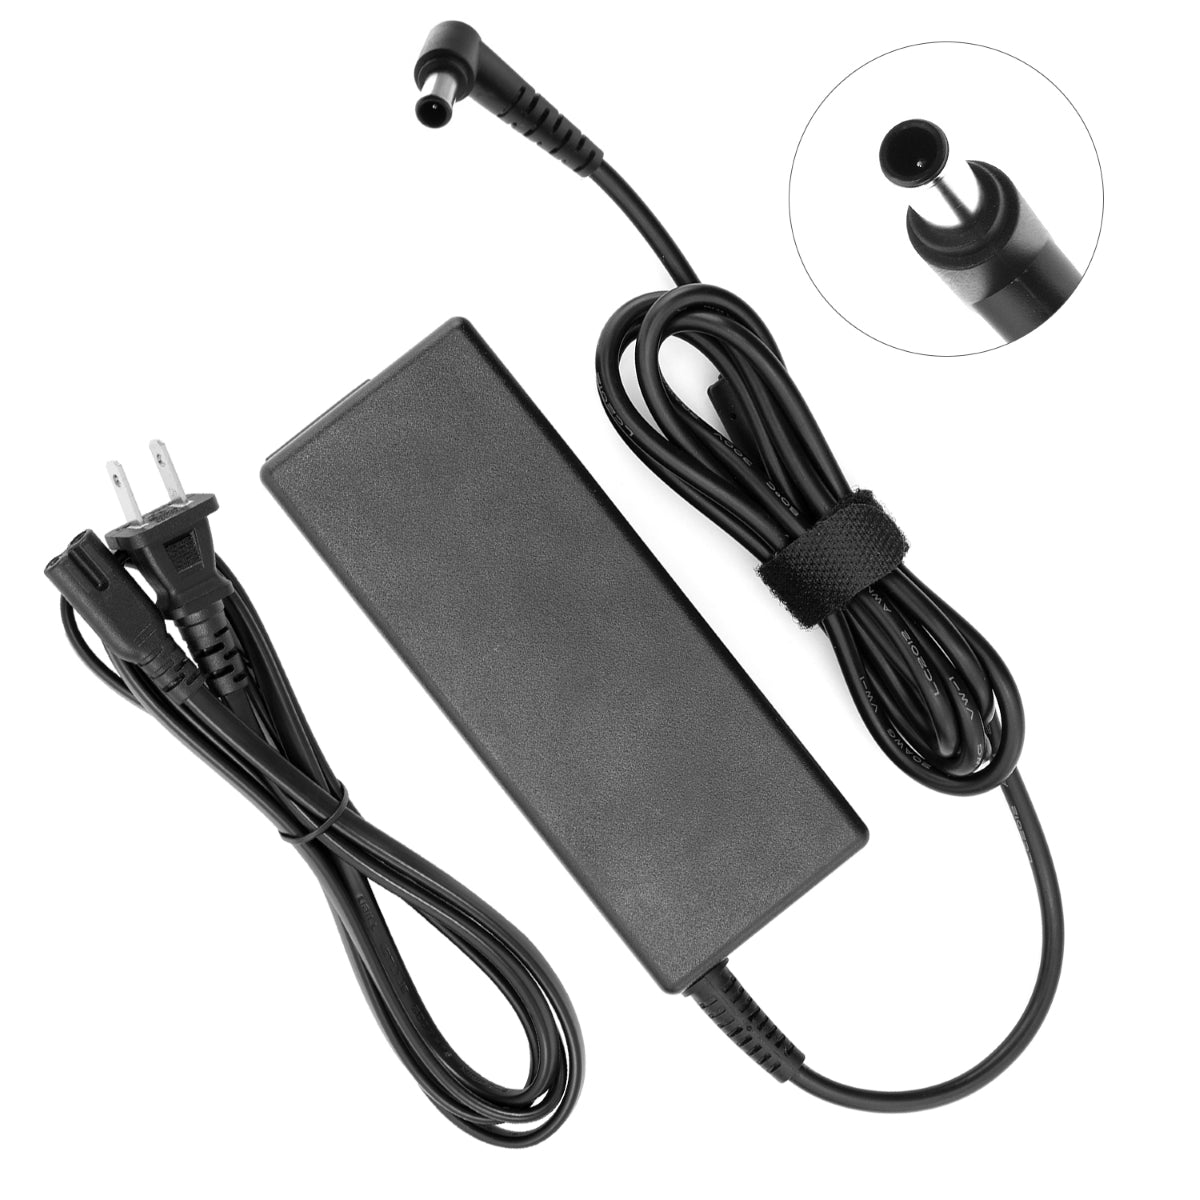 AC Adapter Power Supply for Samsung U28E590D Monitor